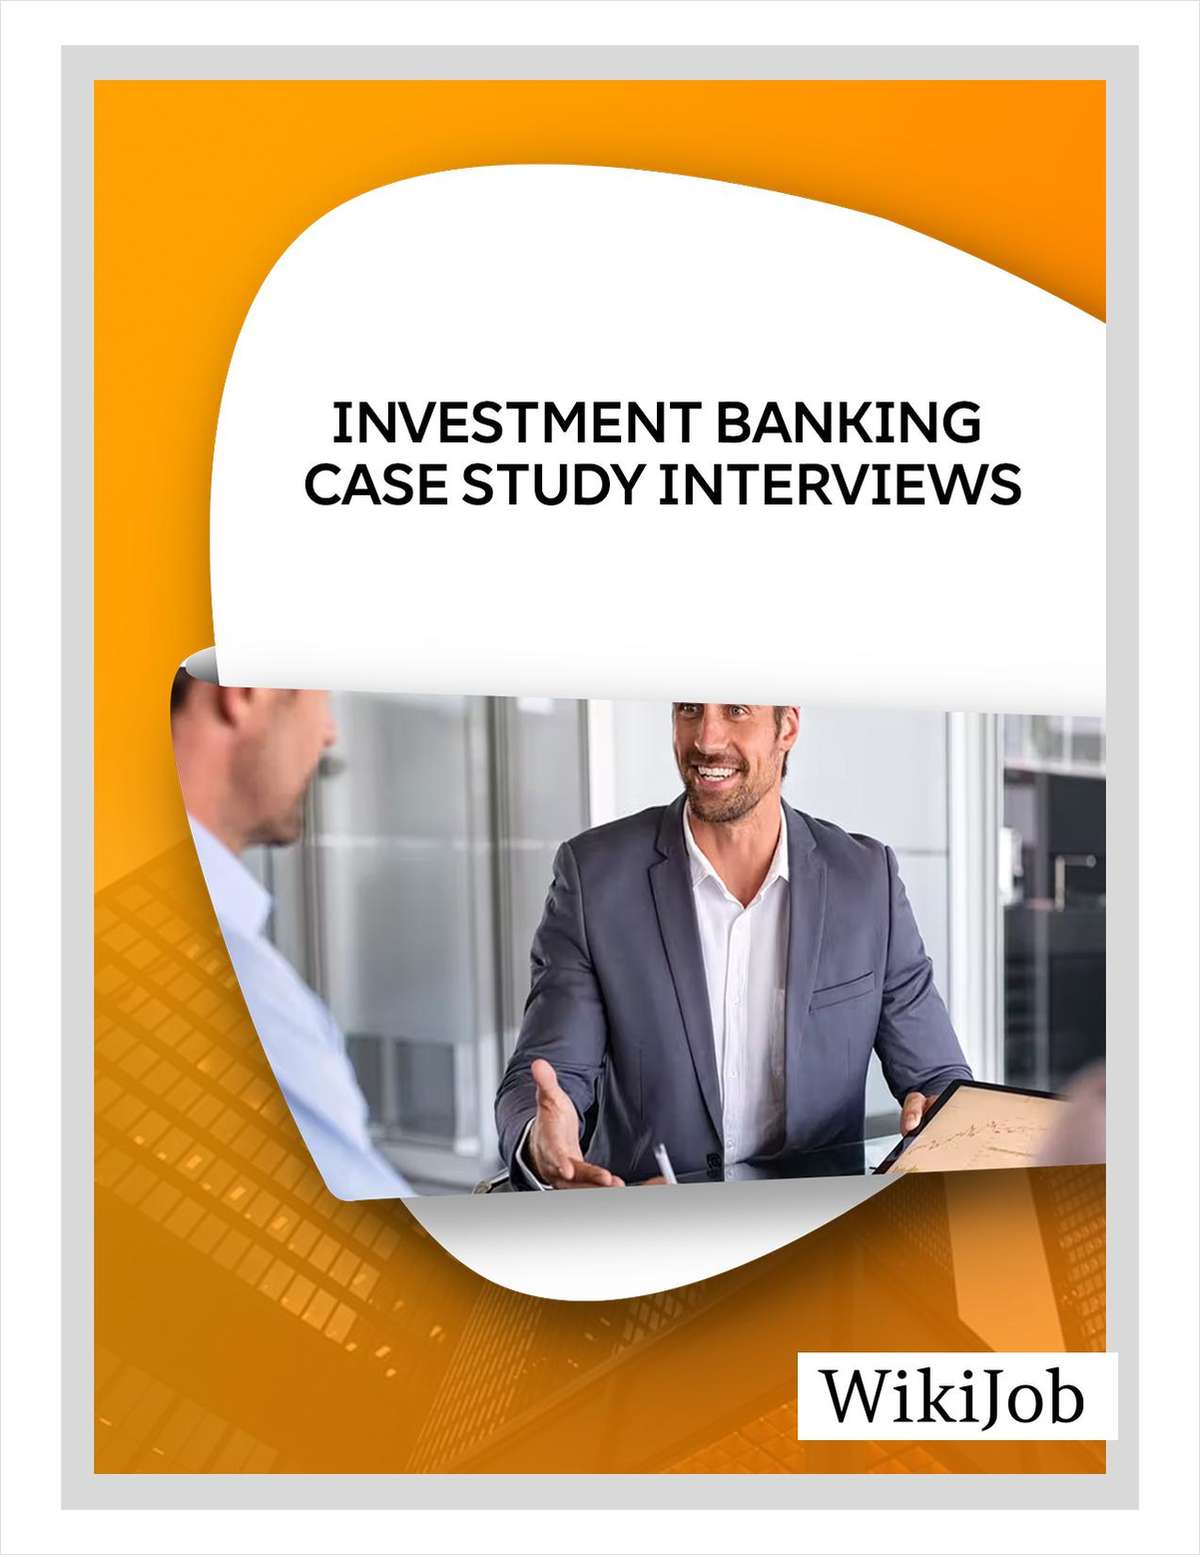 How to Succeed at Investment Banking Case Study Interviews